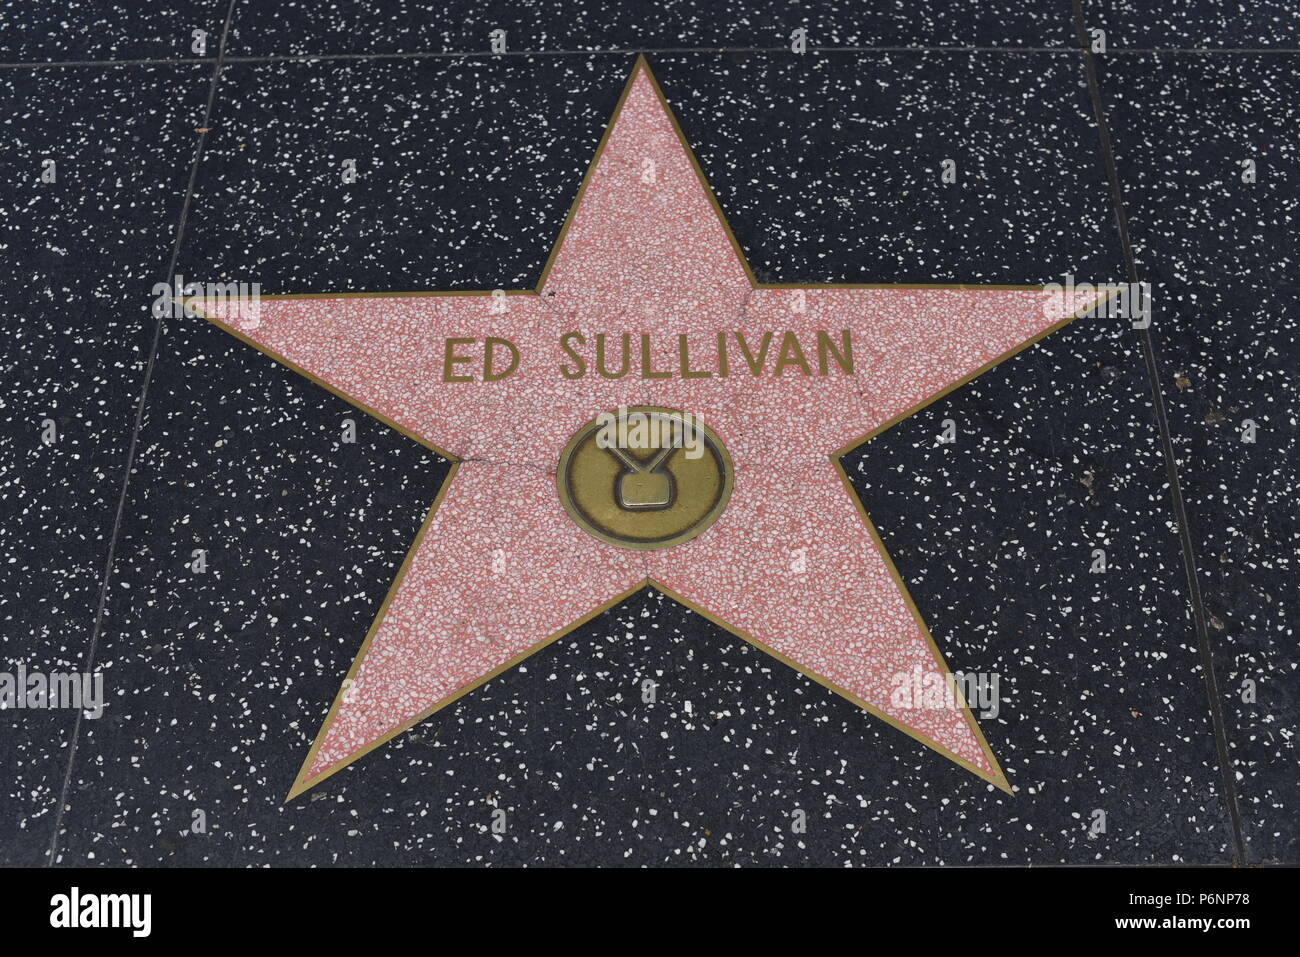 HOLLYWOOD, CA - June 29: Ed Sullivan star on the Hollywood Walk of Fame in Hollywood, California on June 29, 2018. Stock Photo